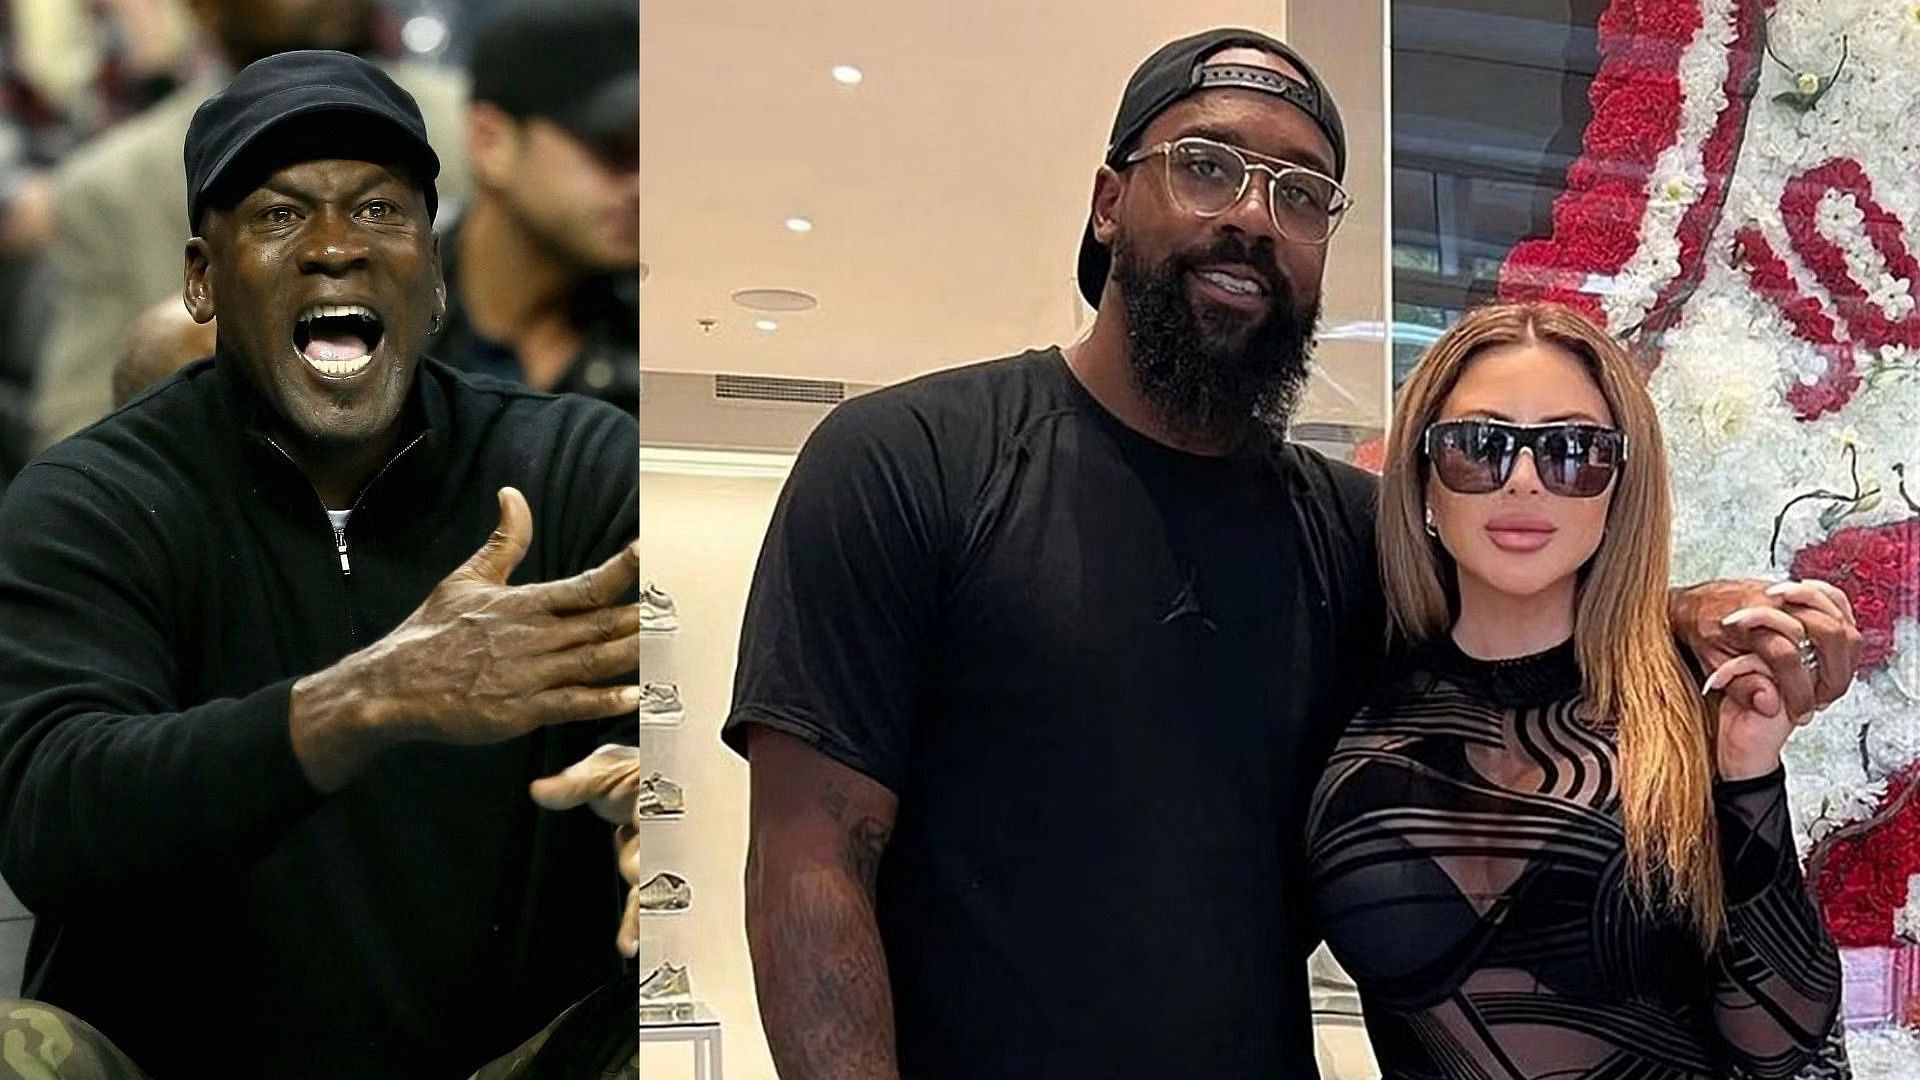 Marcus Jordan and Larsa Pippen clarifies on the news that they are already engaged